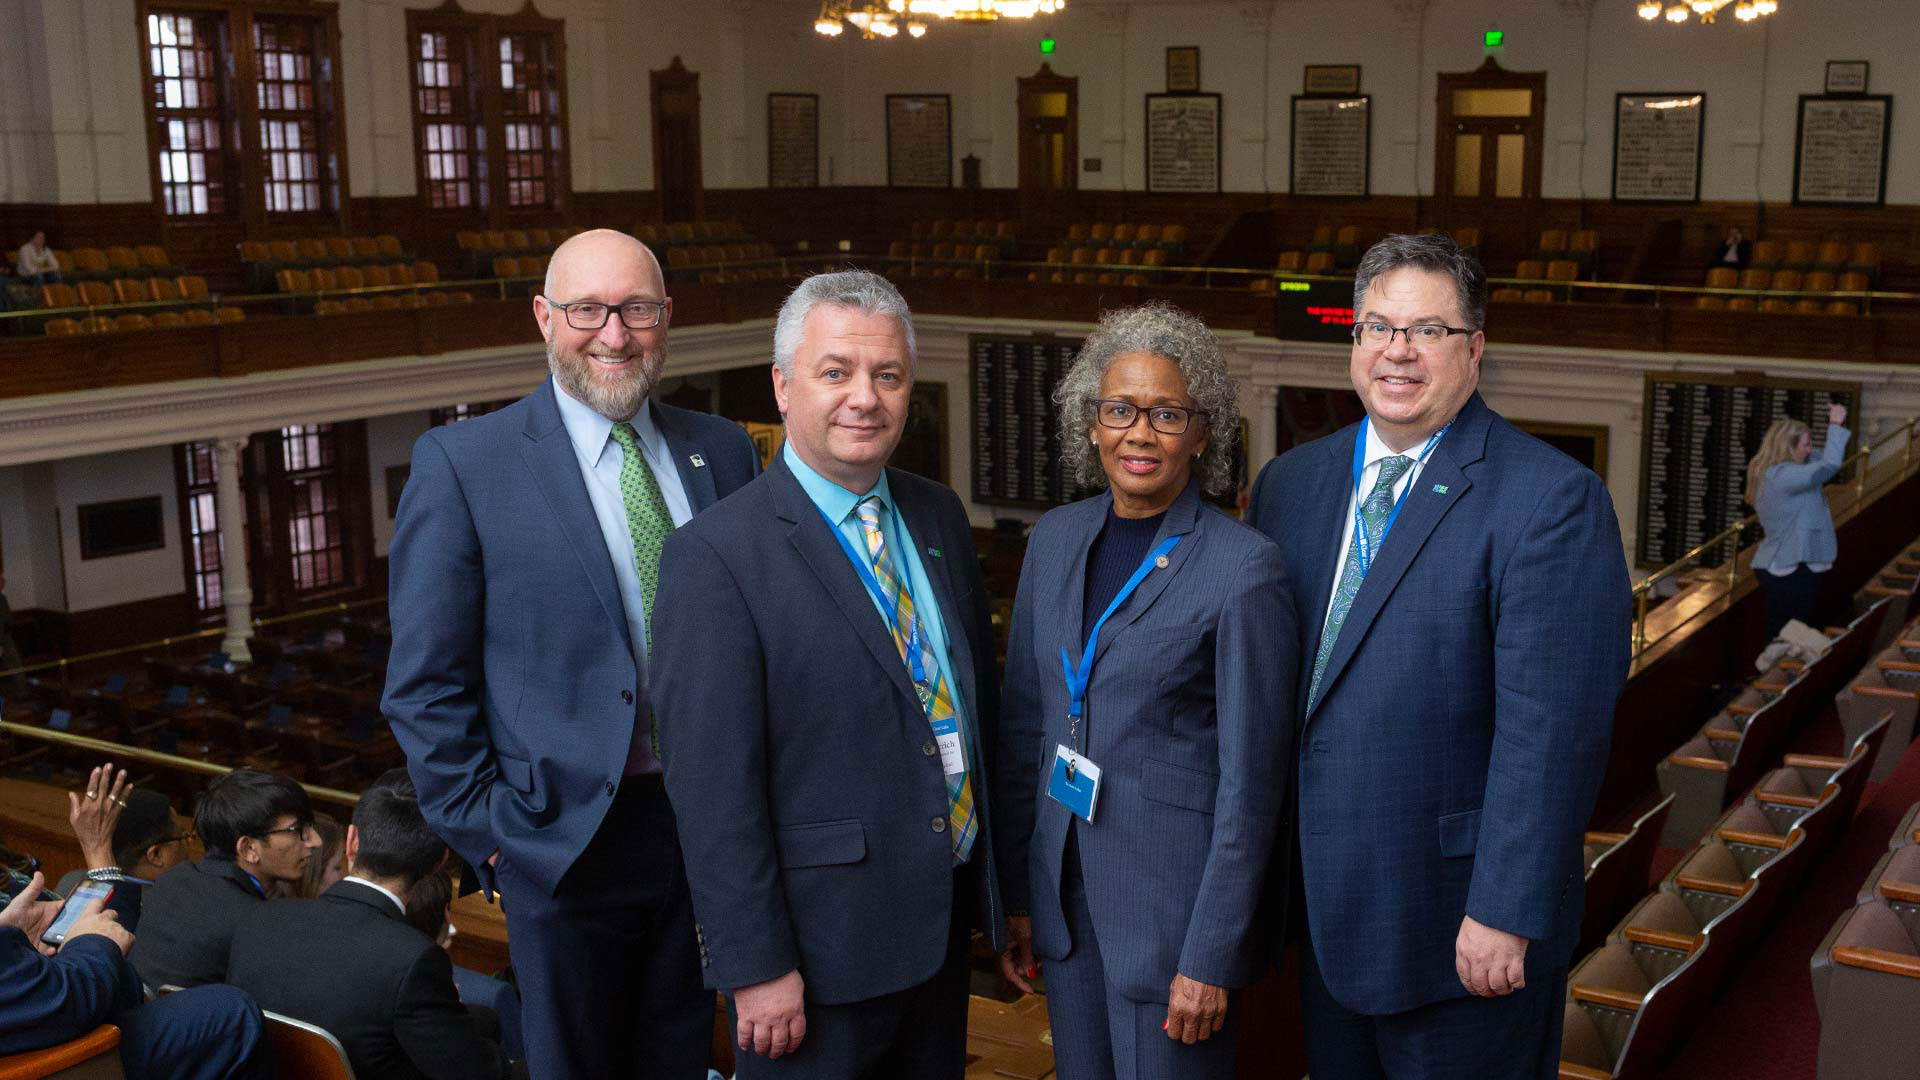 UHCL leadership visits the Texas Capitol